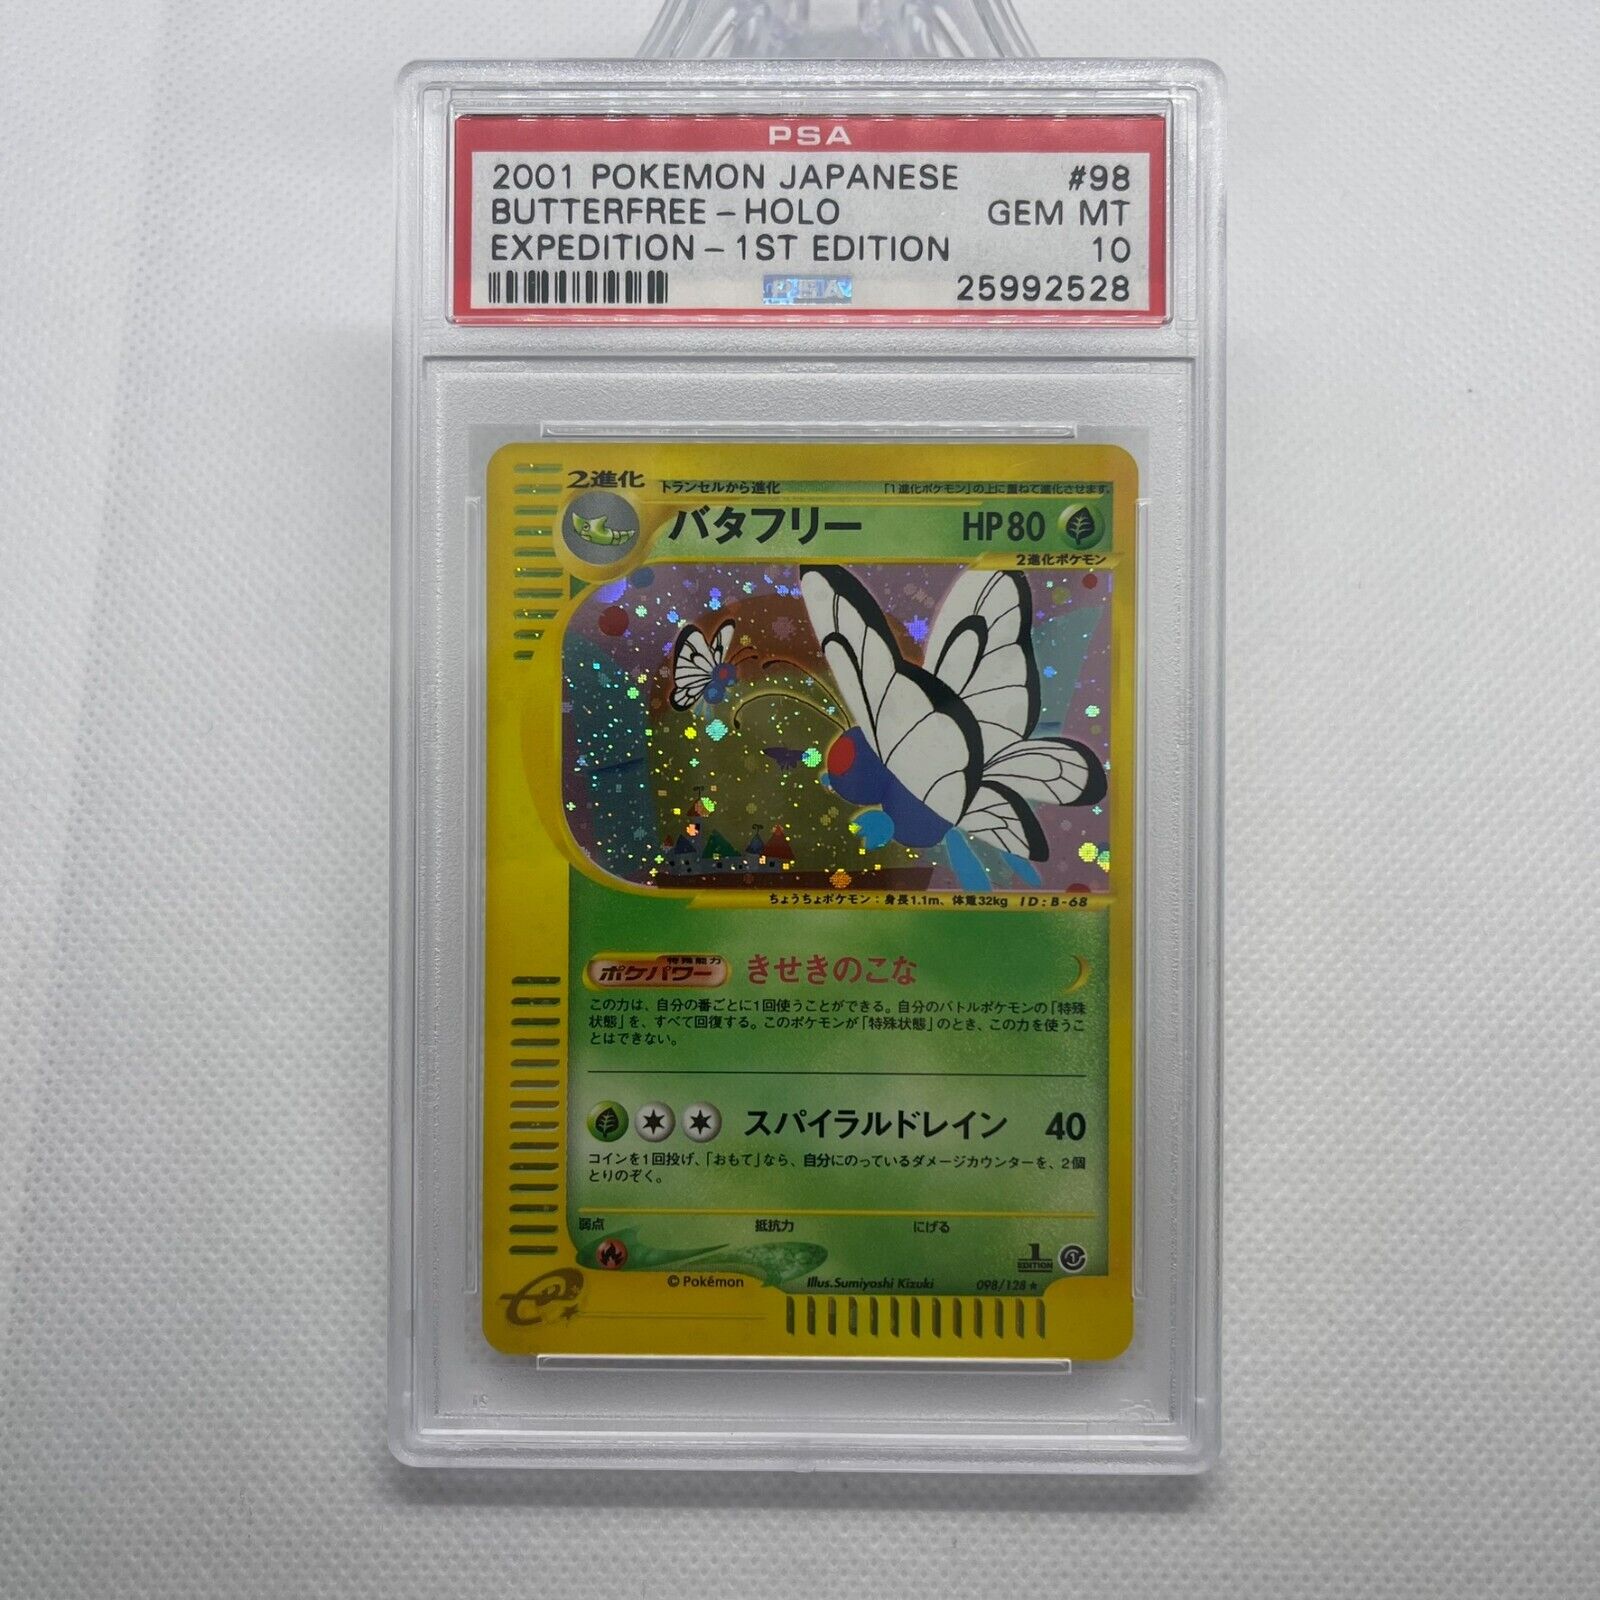 PSA 10 Butterfree Holo 98/128 Japanese Expedition 1st Edition 2001 Pokemon